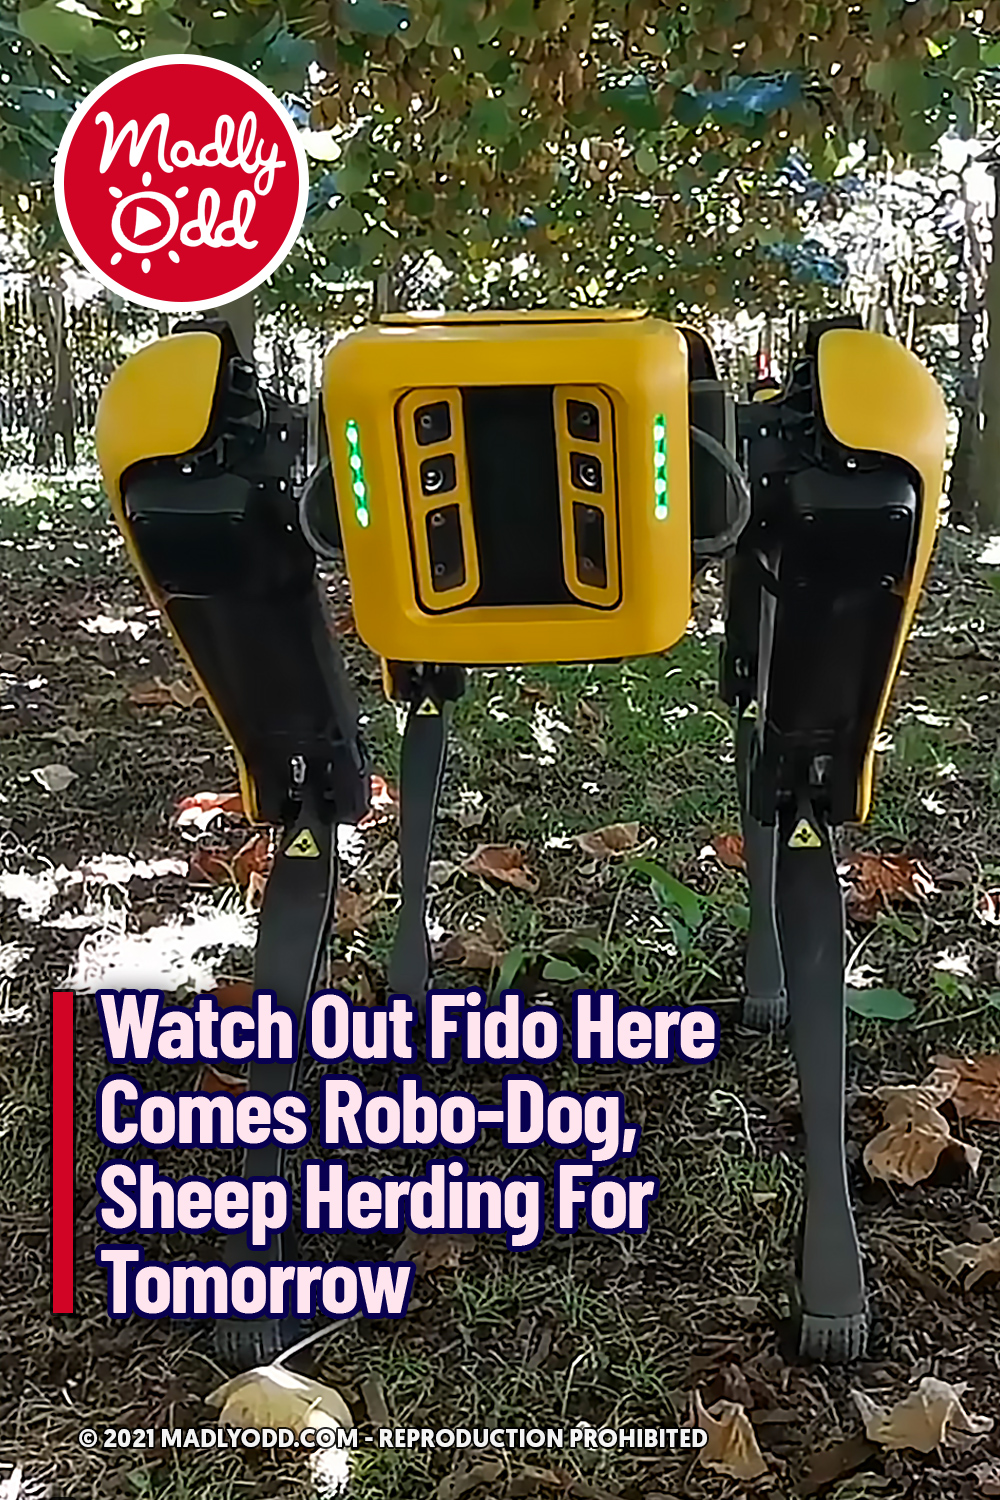 Watch Out Fido Here Comes Robo-Dog, Sheep Herding For Tomorrow